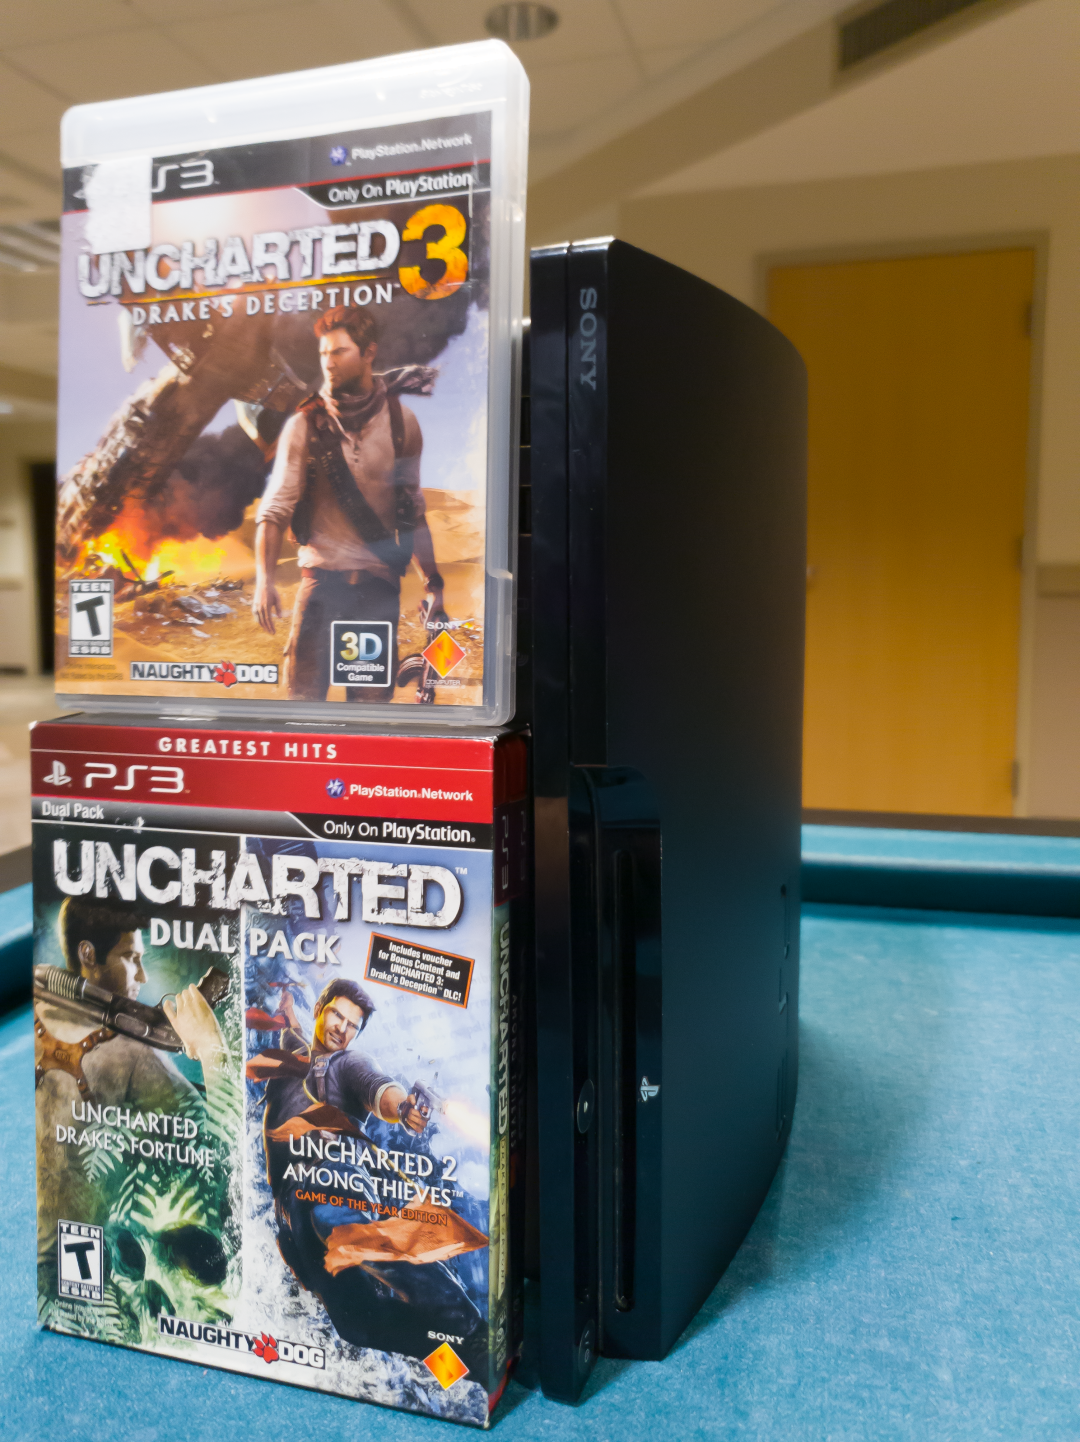 PlayStation Pass Required to Play Uncharted 3 Online - The Koalition